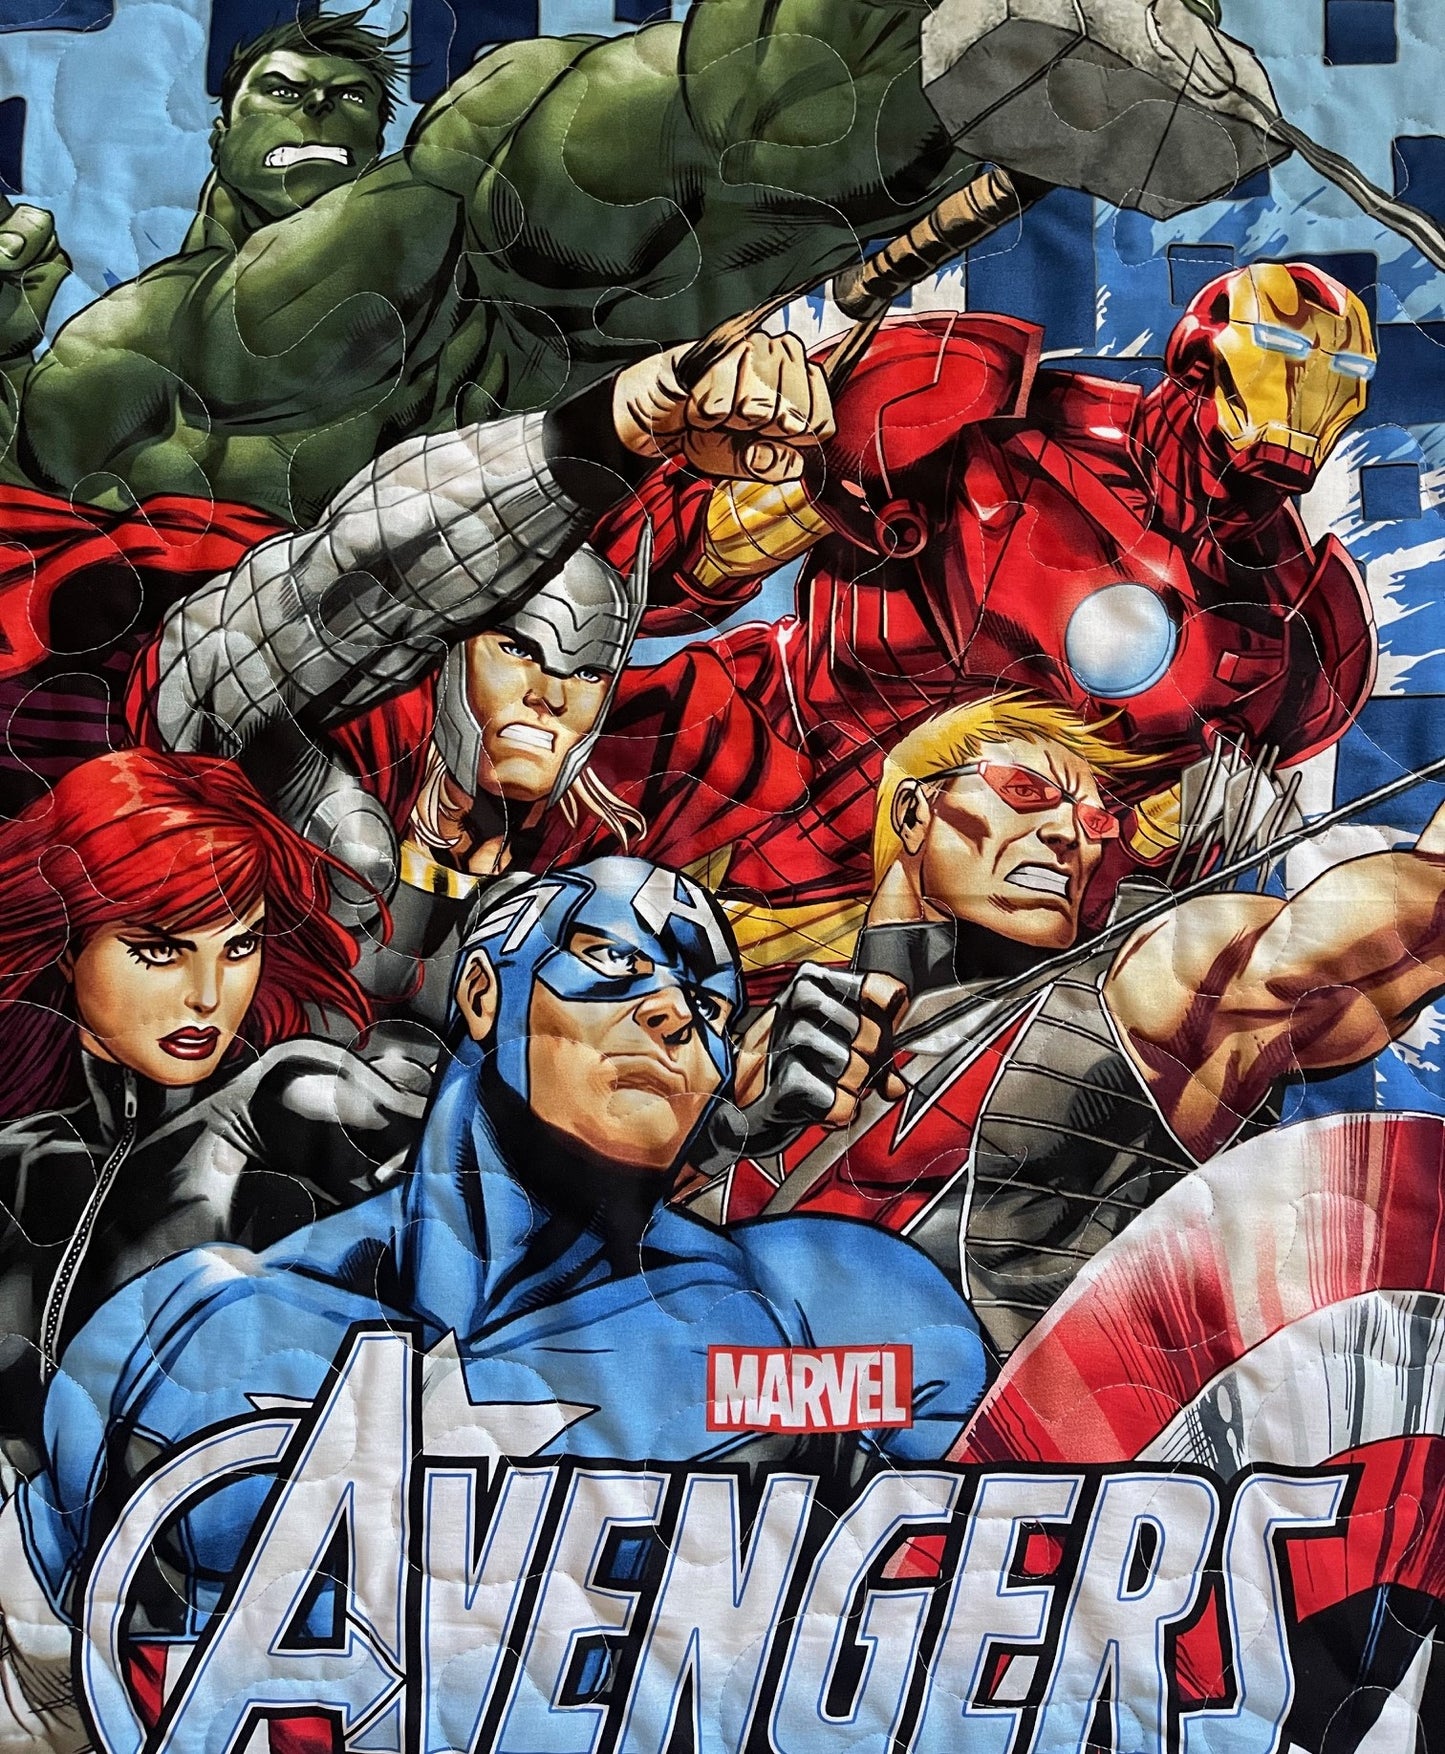 MARVEL SUPERHEROES AVENGERS ASSEMBLE BLACK WIDOW, HAWKEYE, THOR, THE HULK, IRON MAN, CAPTAIN AMERICA Inspired Quilted Blanket Soft Flannel Backing